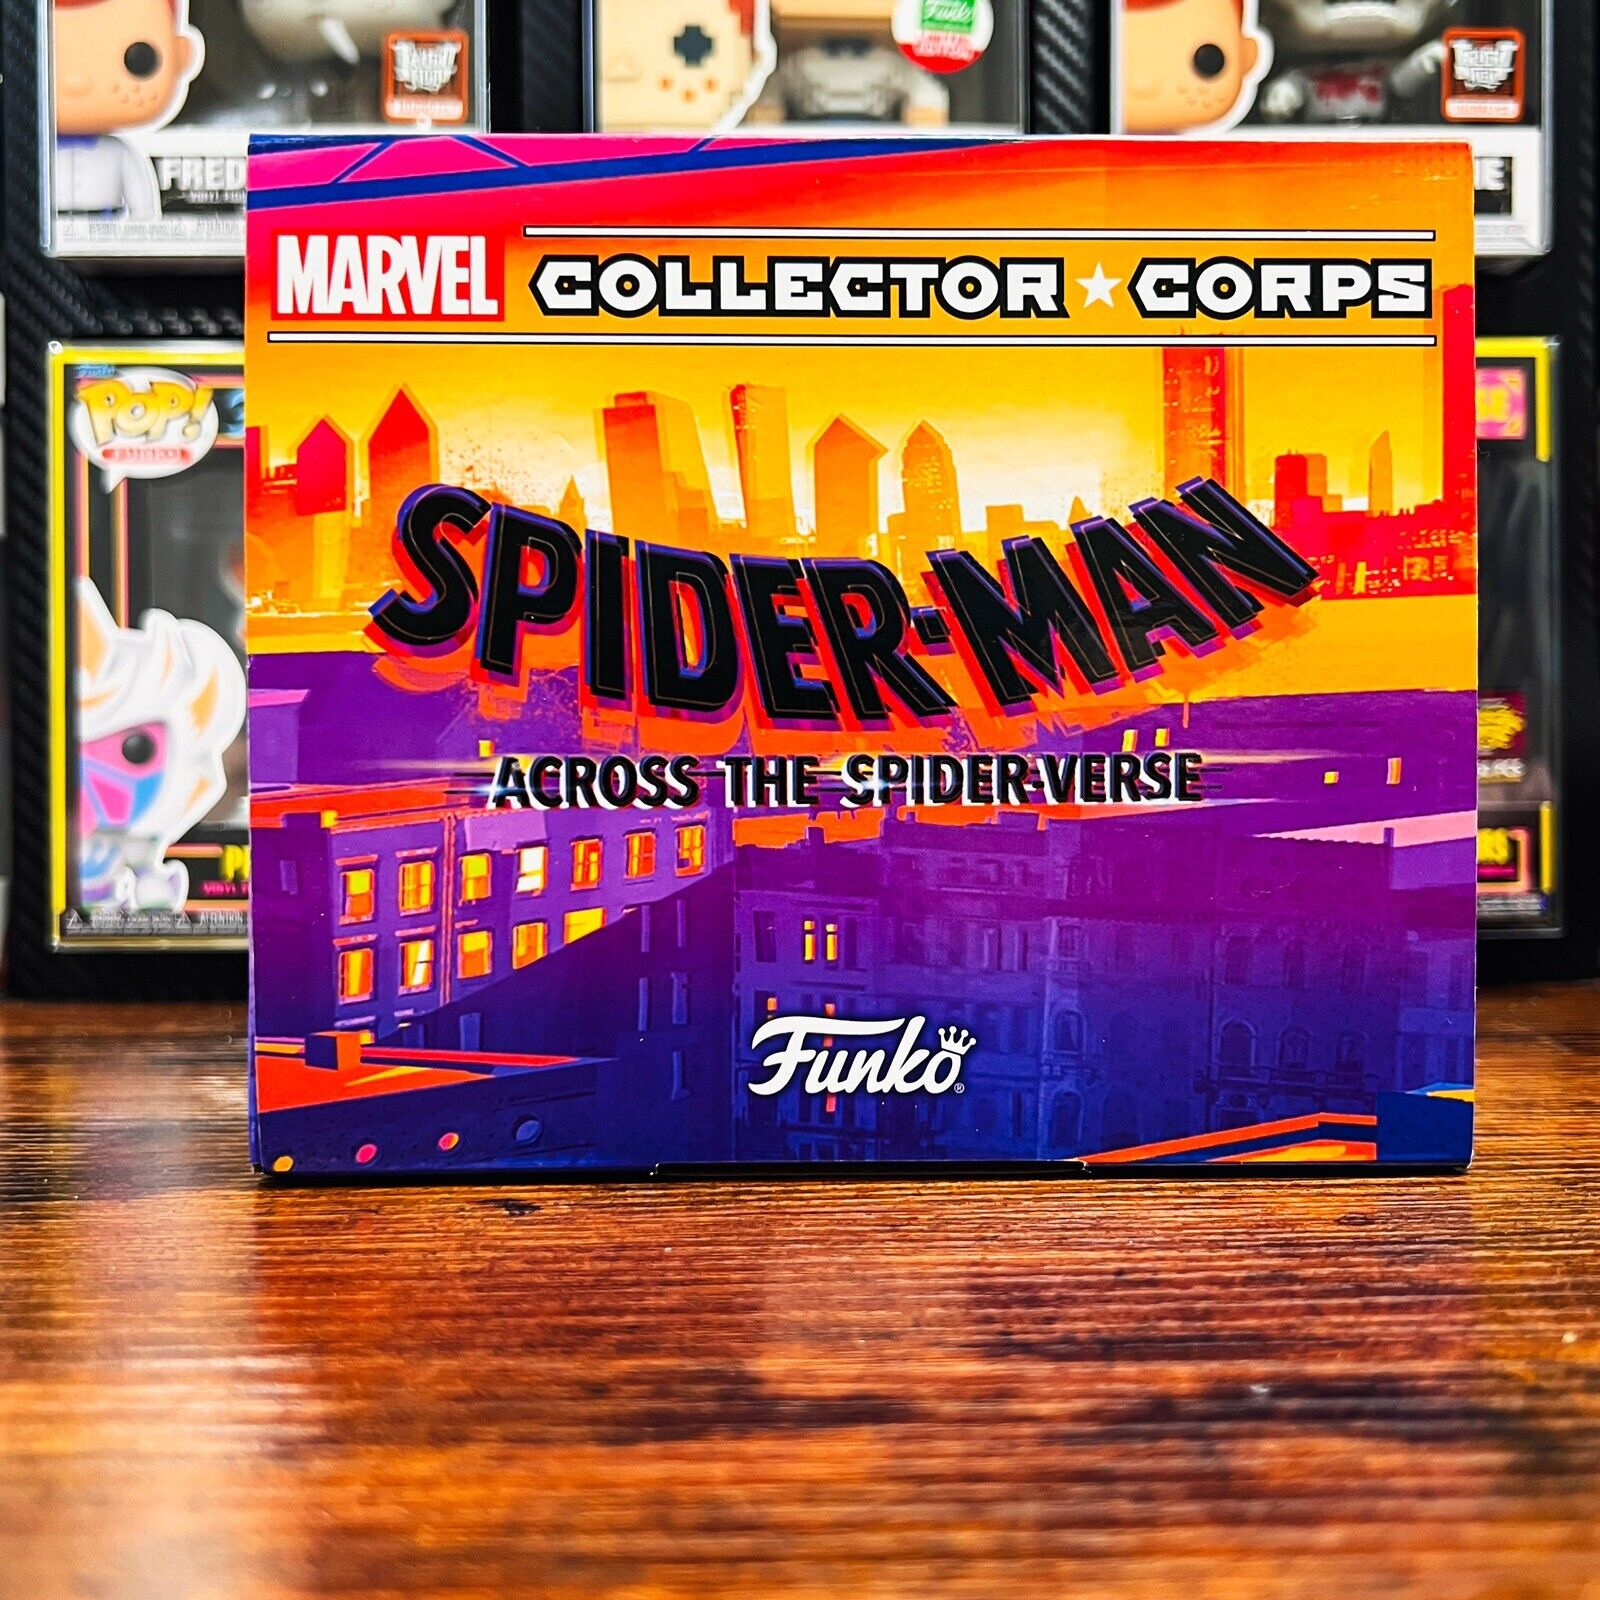 Spider-Man: Across the Spider-Verse MARVEL Funko Pop Collector Corps Size: M